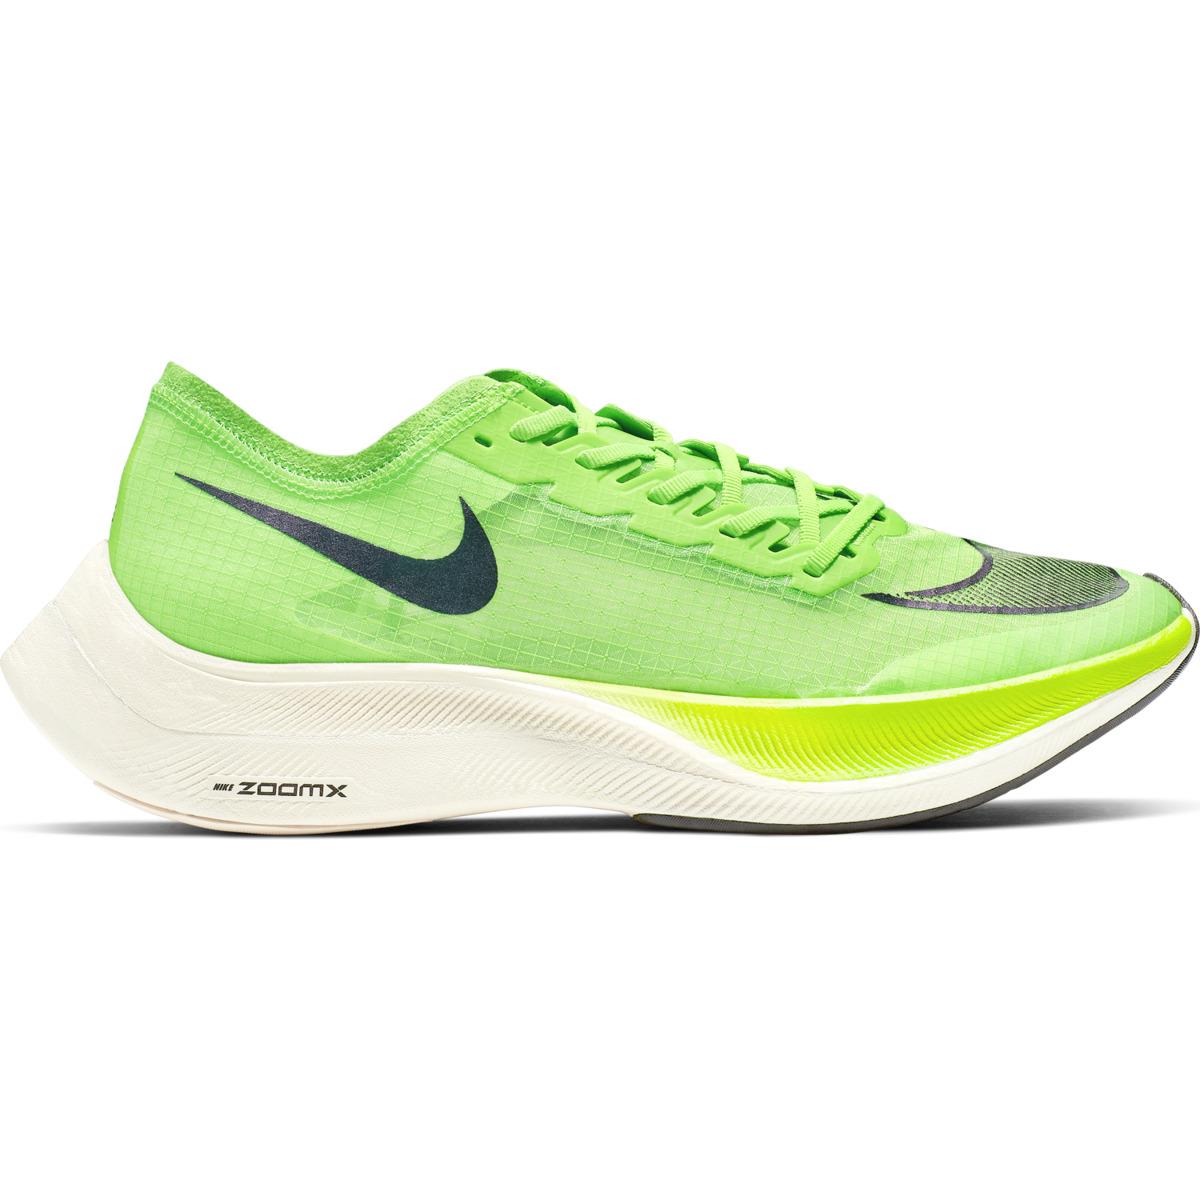 Nike Zoom Vaporfly Next % Running Shoes in Green for Men - Lyst